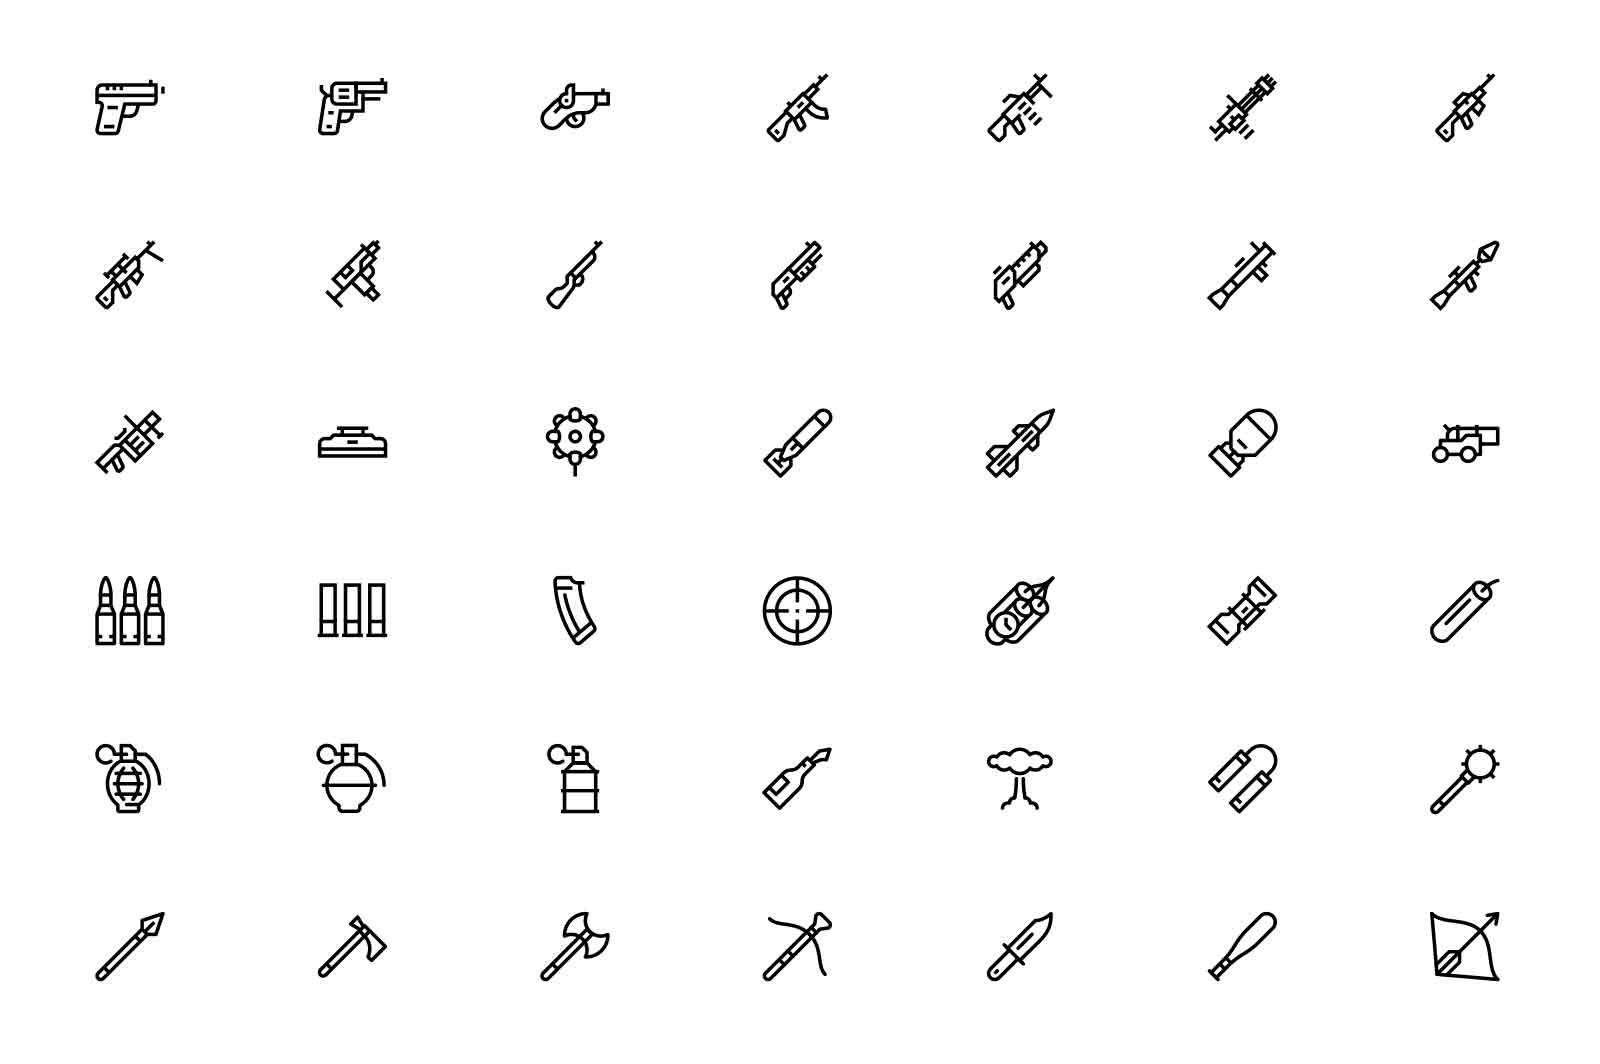 Various weapons for attack, machine guns and pistols icons set vector illustration.